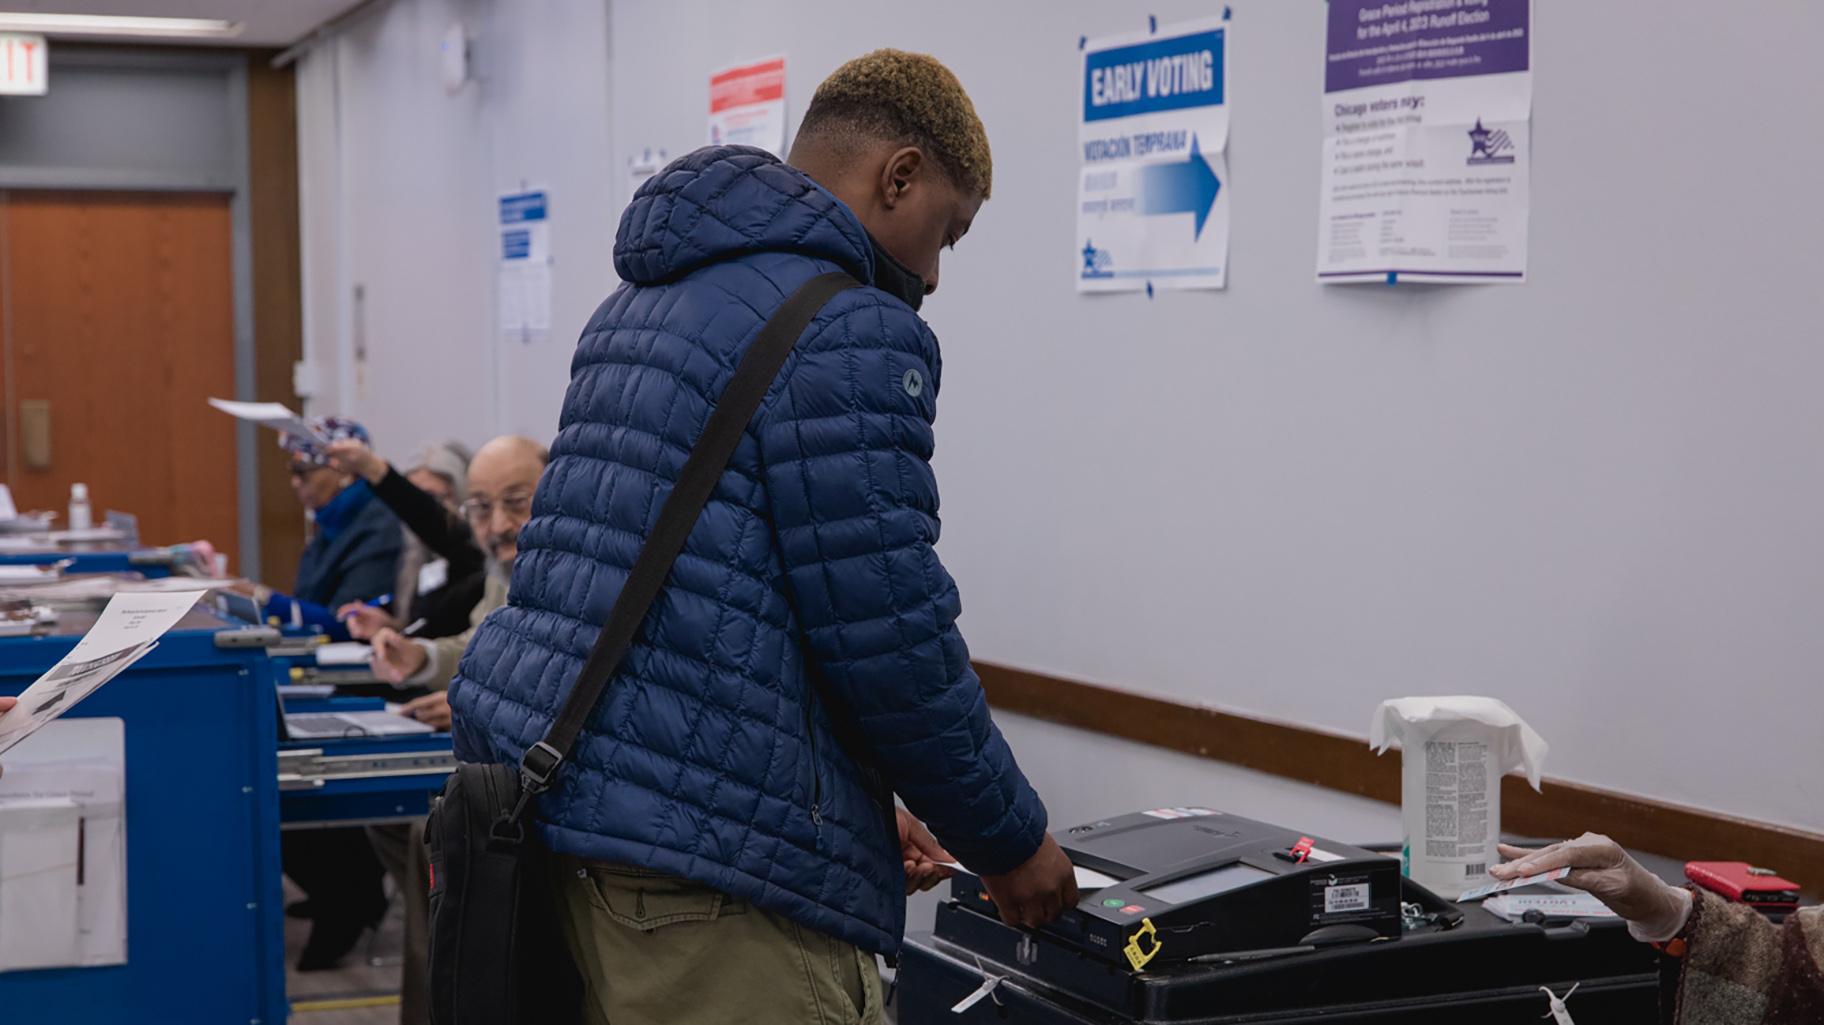 A student at the University of Illinois-Chicago casts their ballot for the April 4 Chicago runoff election at the UIC Student Center polling location. (Michael Izquierdo / WTTW News)